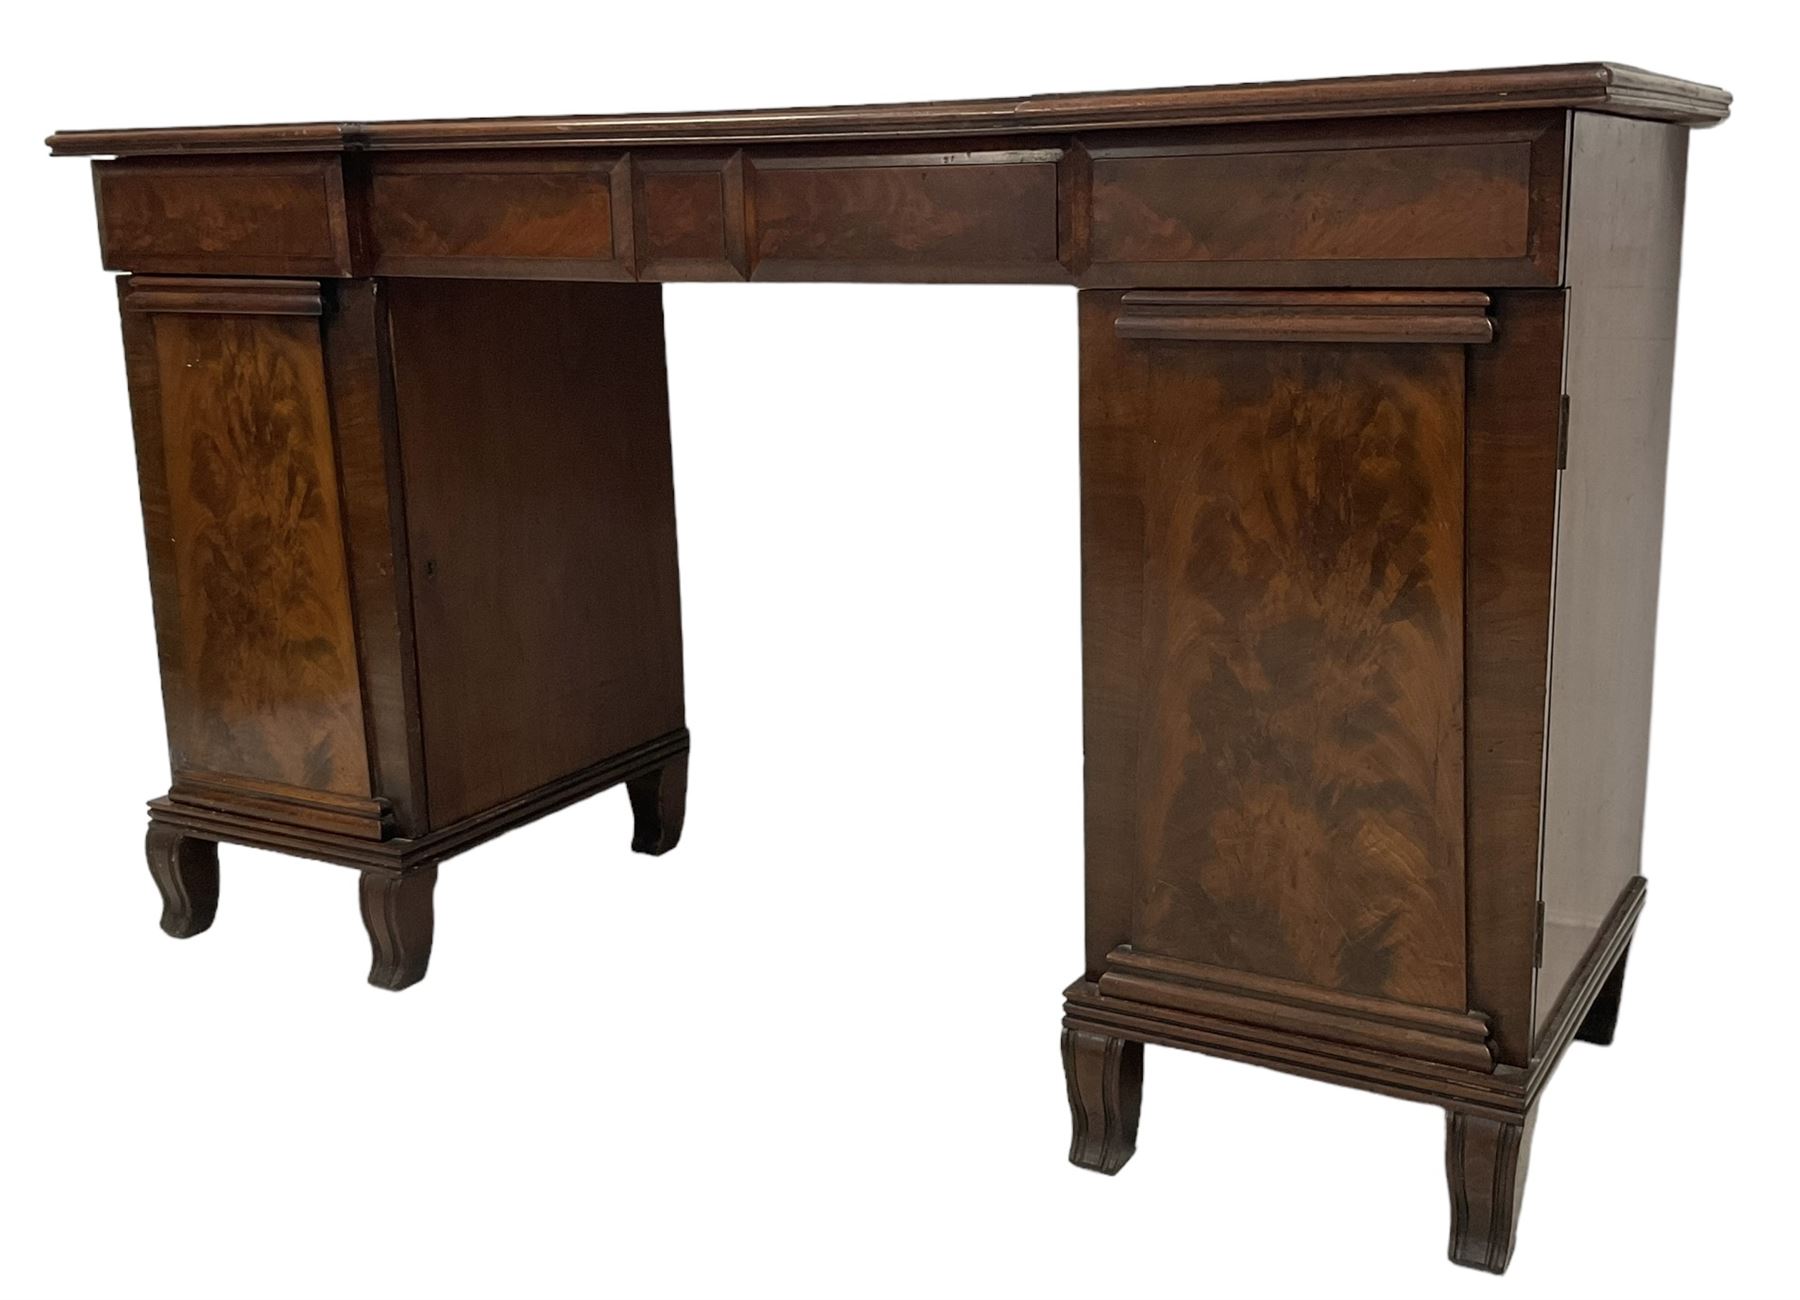 William IV mahogany reverse-breakfront twin pedestal sideboard - Image 2 of 12